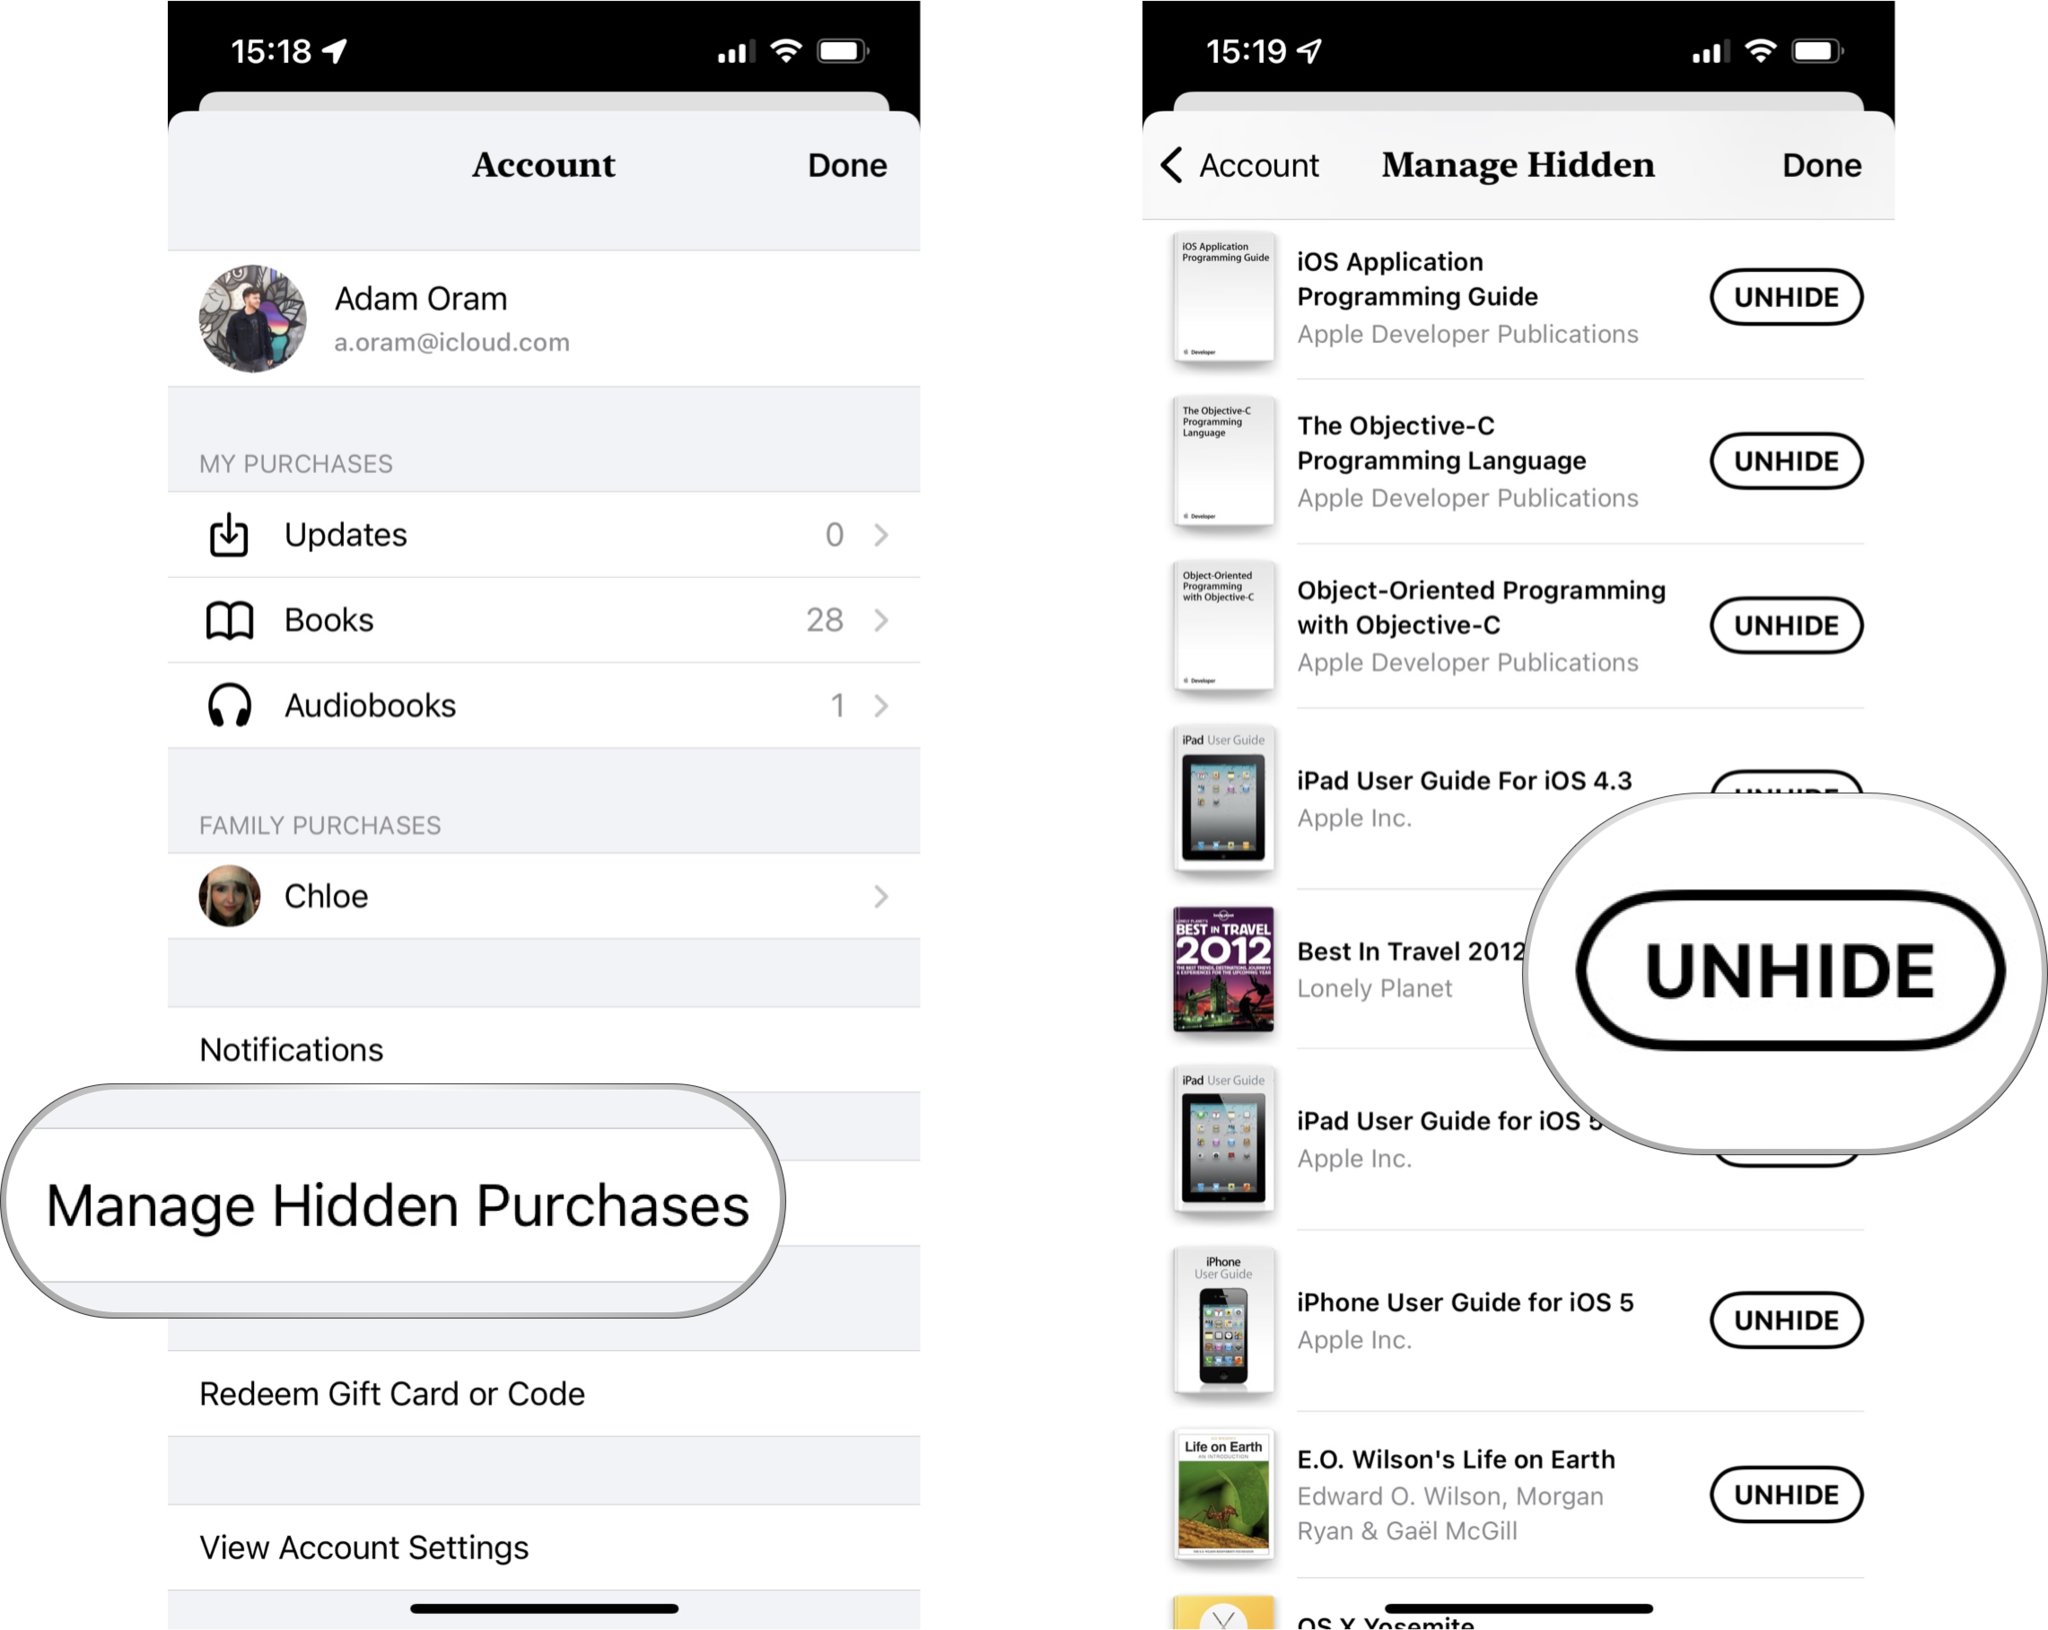 How to unhide a book in Apple Books: Tap on Manage Hidden Purchases, tap Unhide on any book